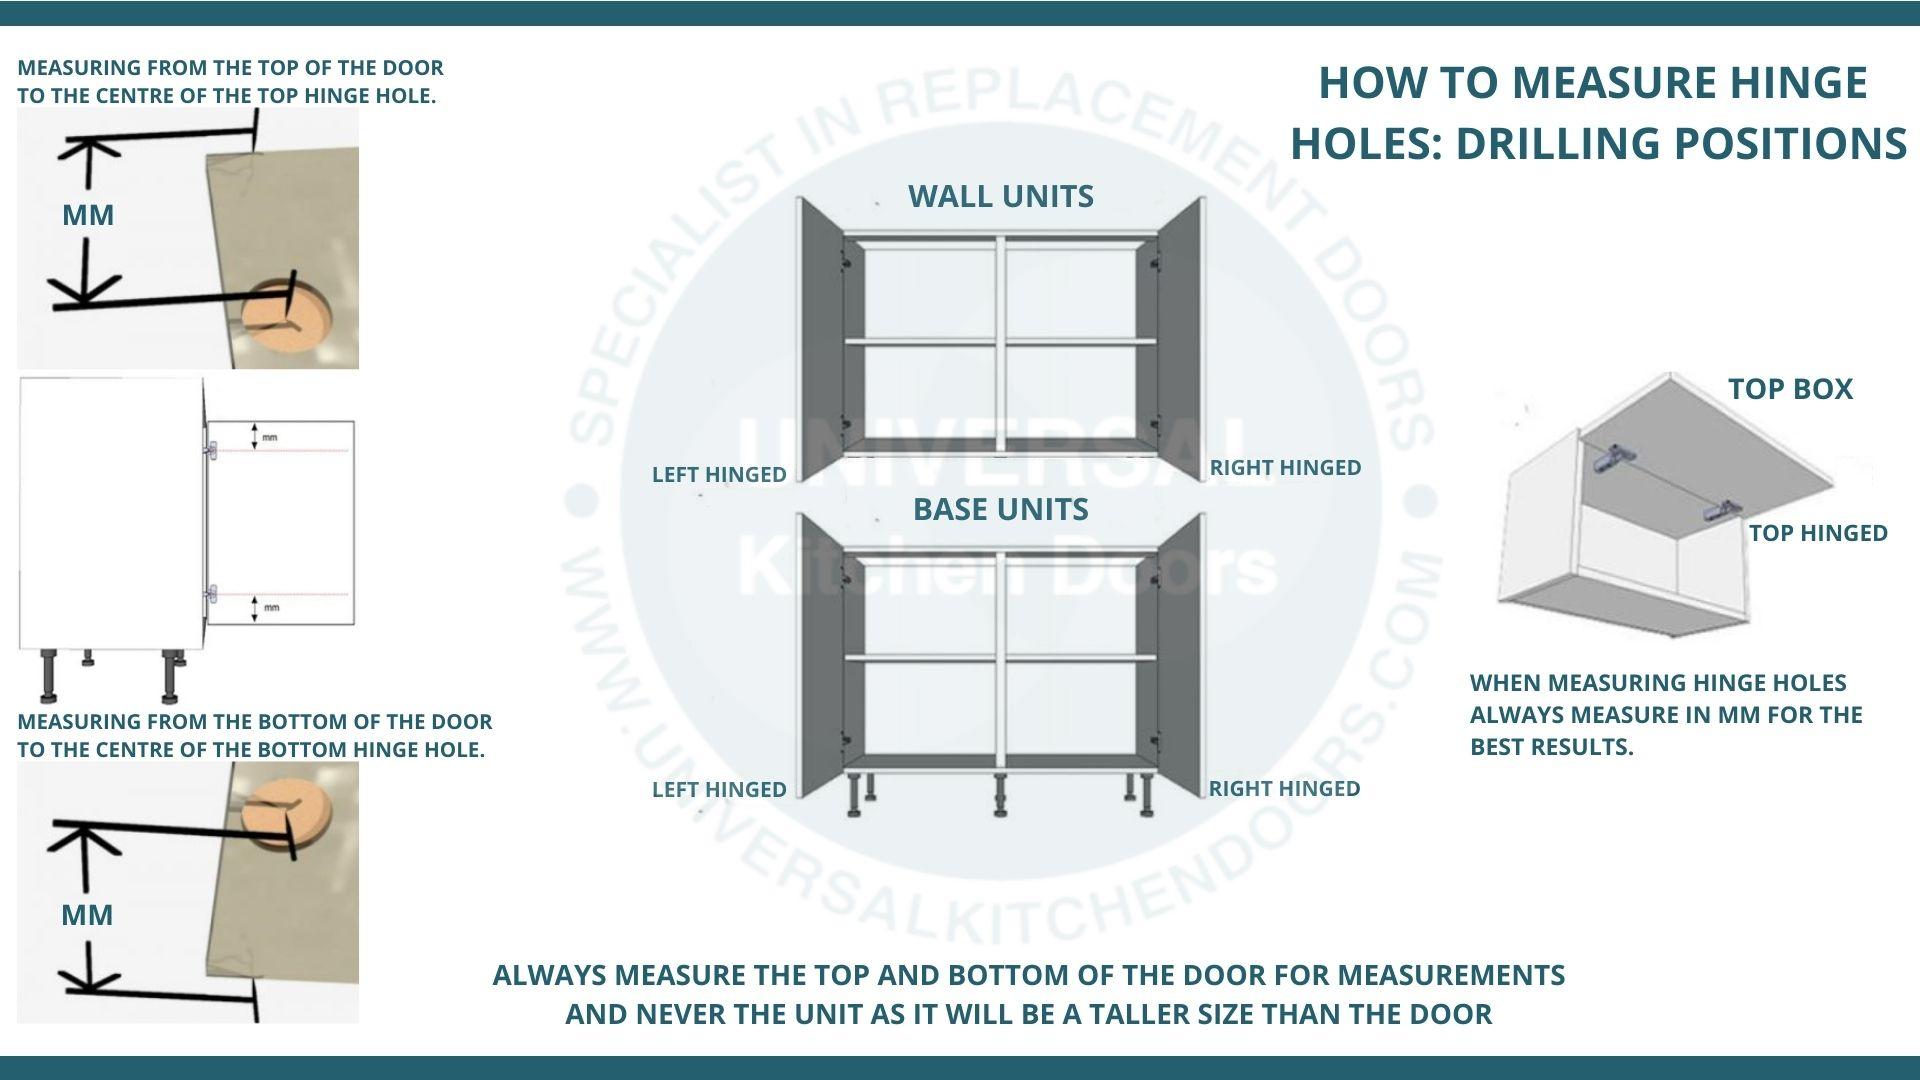 HOW TO MEASURE HINGE  HOLES: DRILLING POSITIONS